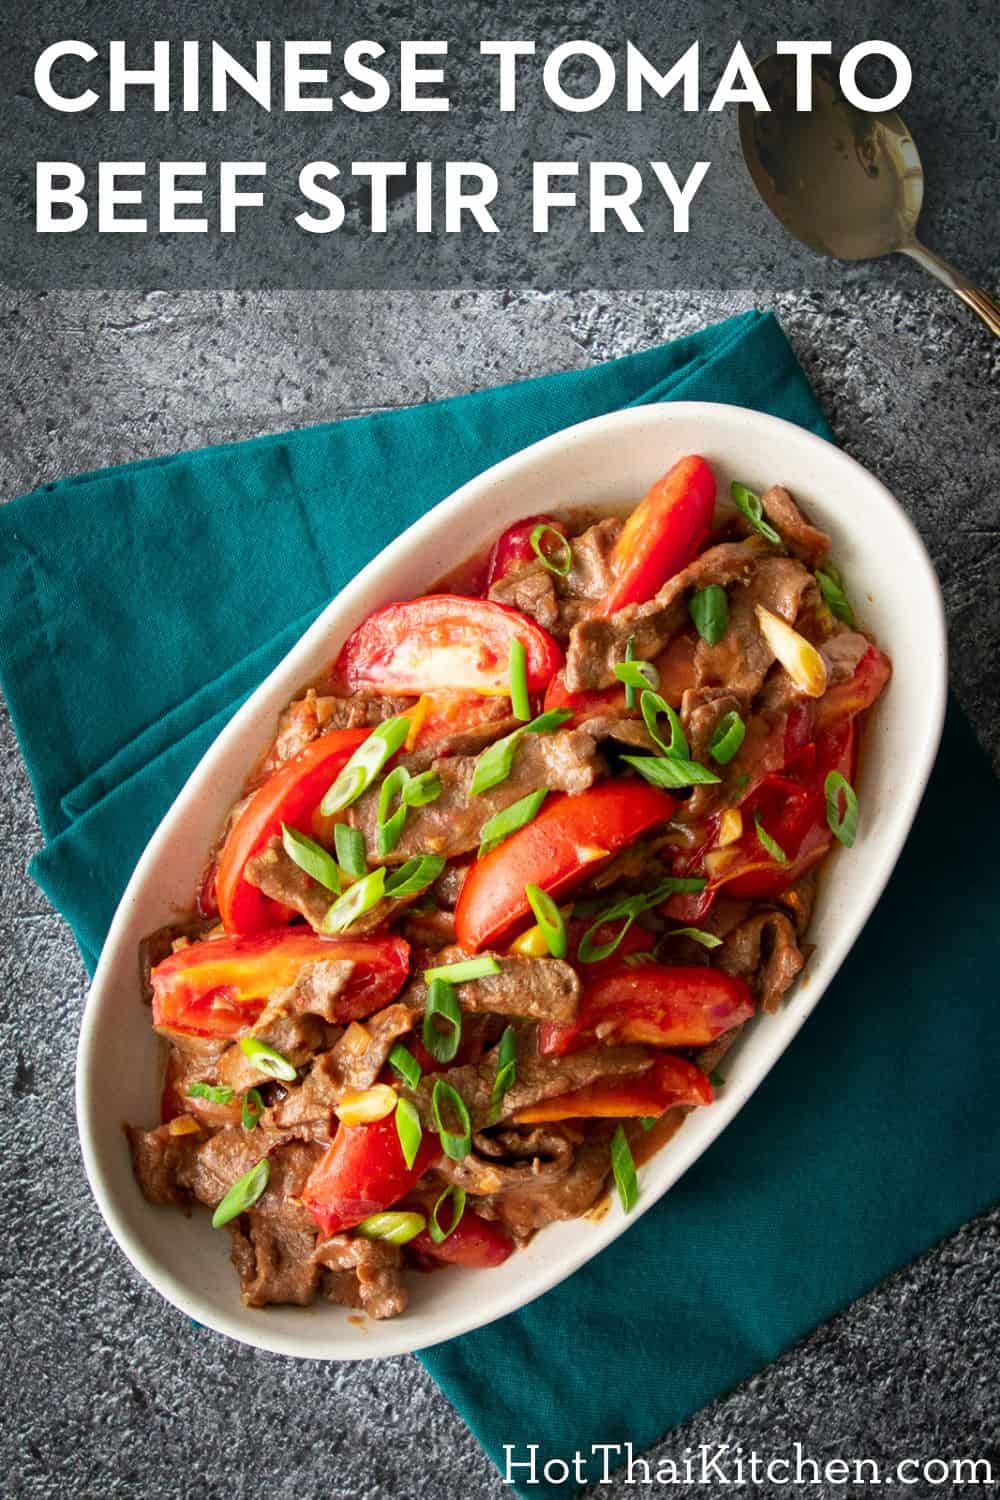 Mother-in-Law's Chinese Tomato Beef Stir Fry